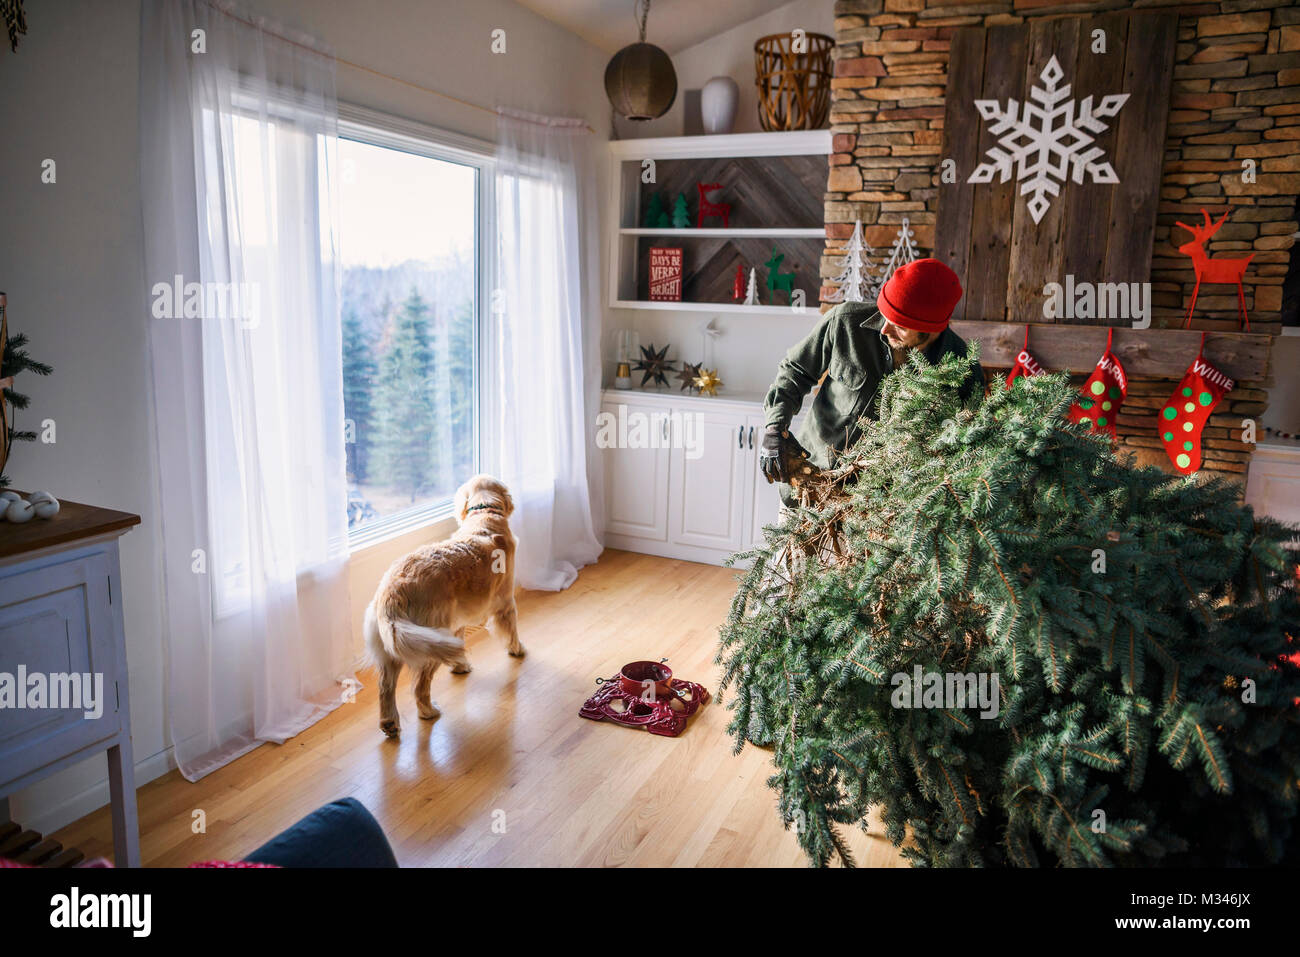 Man setting up a Christmas tree in the living room with golden retriever dog looking out of the window Stock Photo